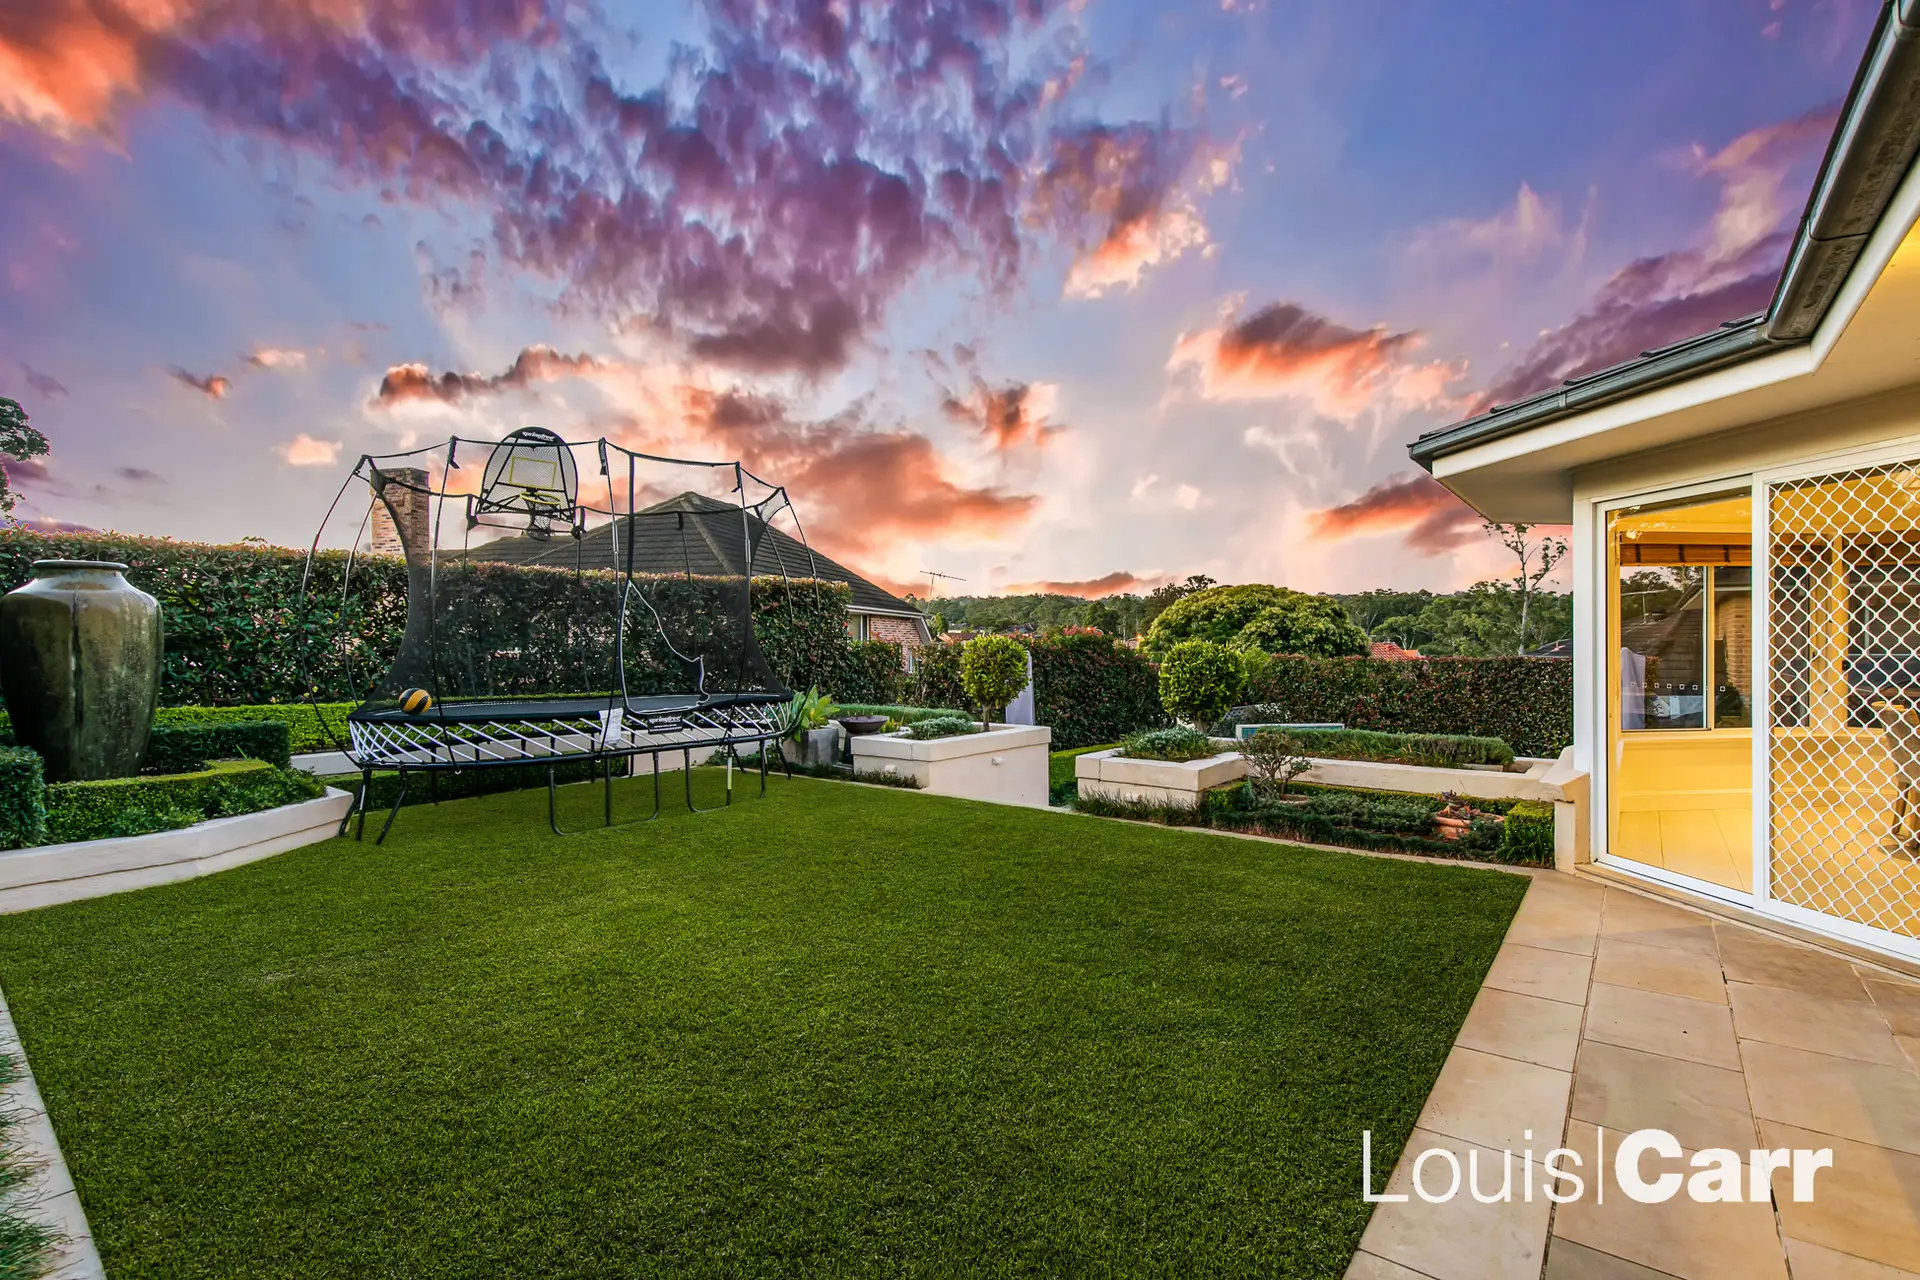 Photo #12: 12 Kambah Place, West Pennant Hills - Sold by Louis Carr Real Estate